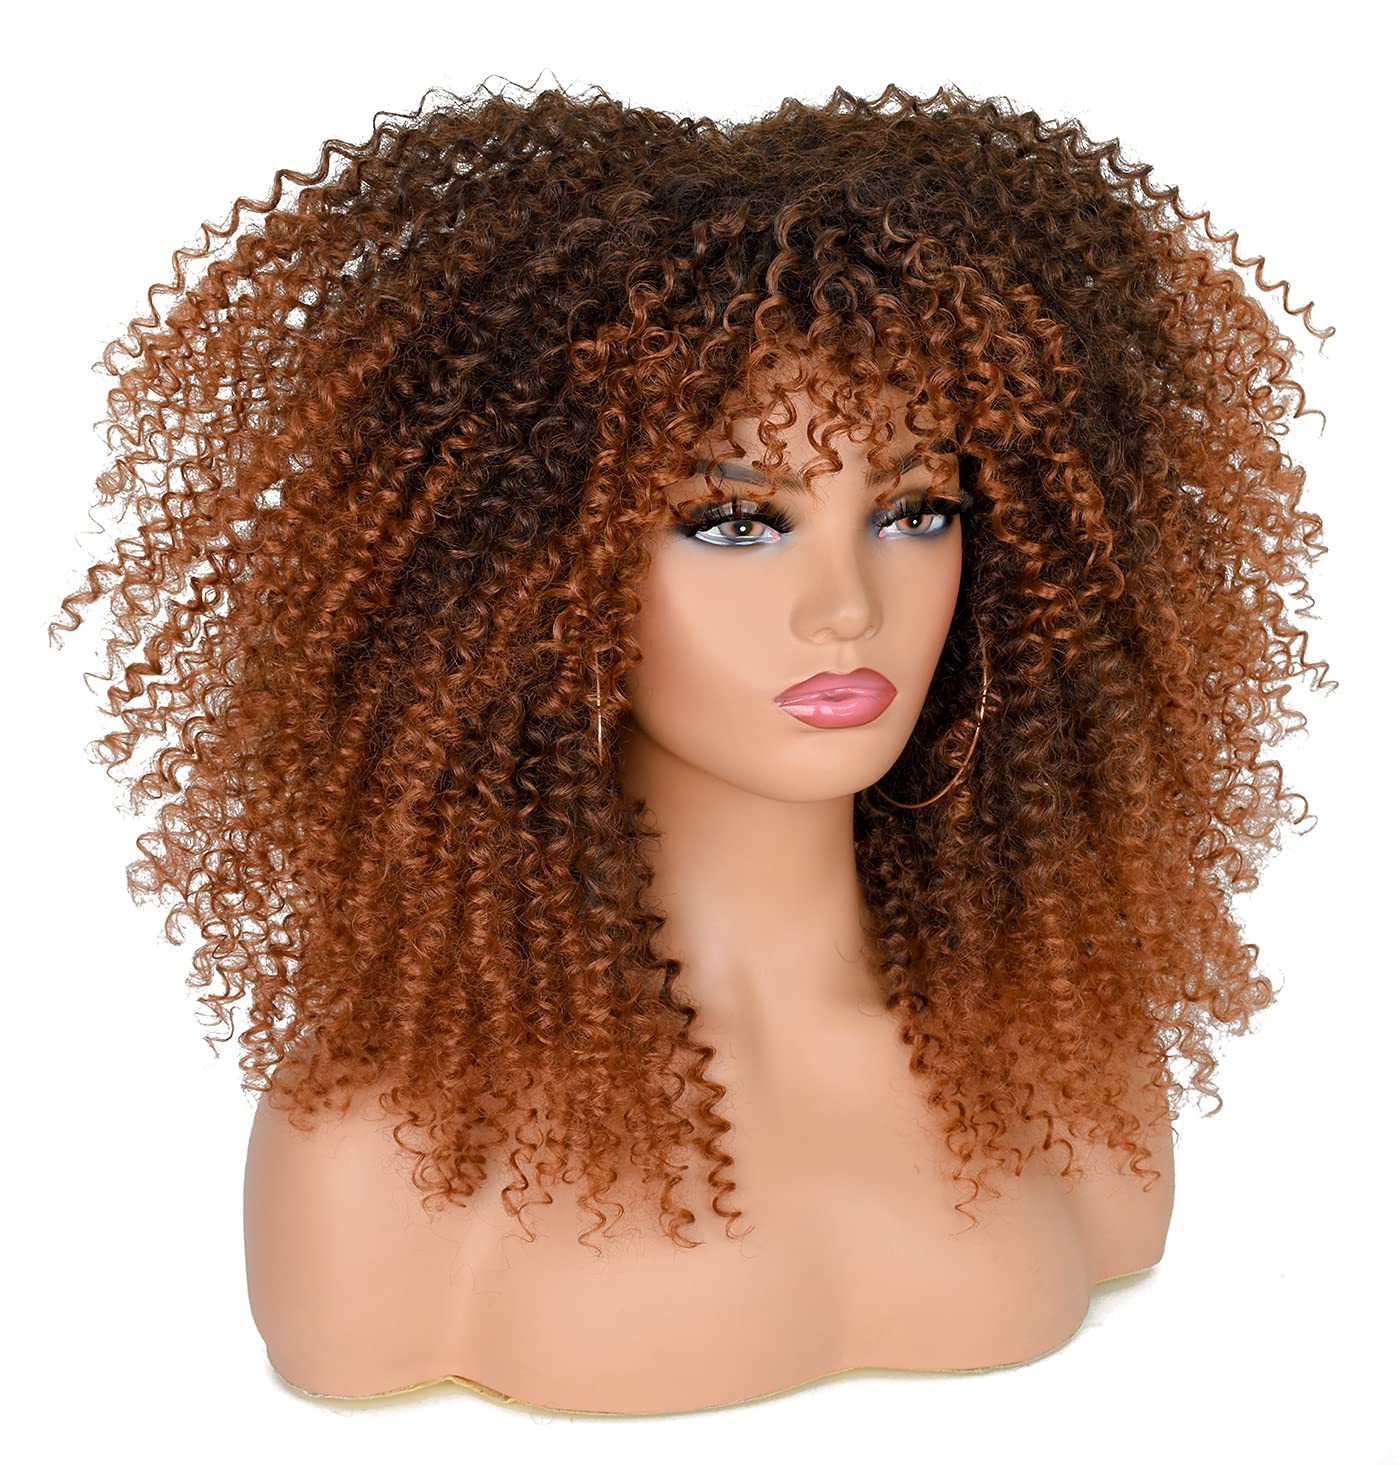 Afro Bomb Curly Wig with Bangs